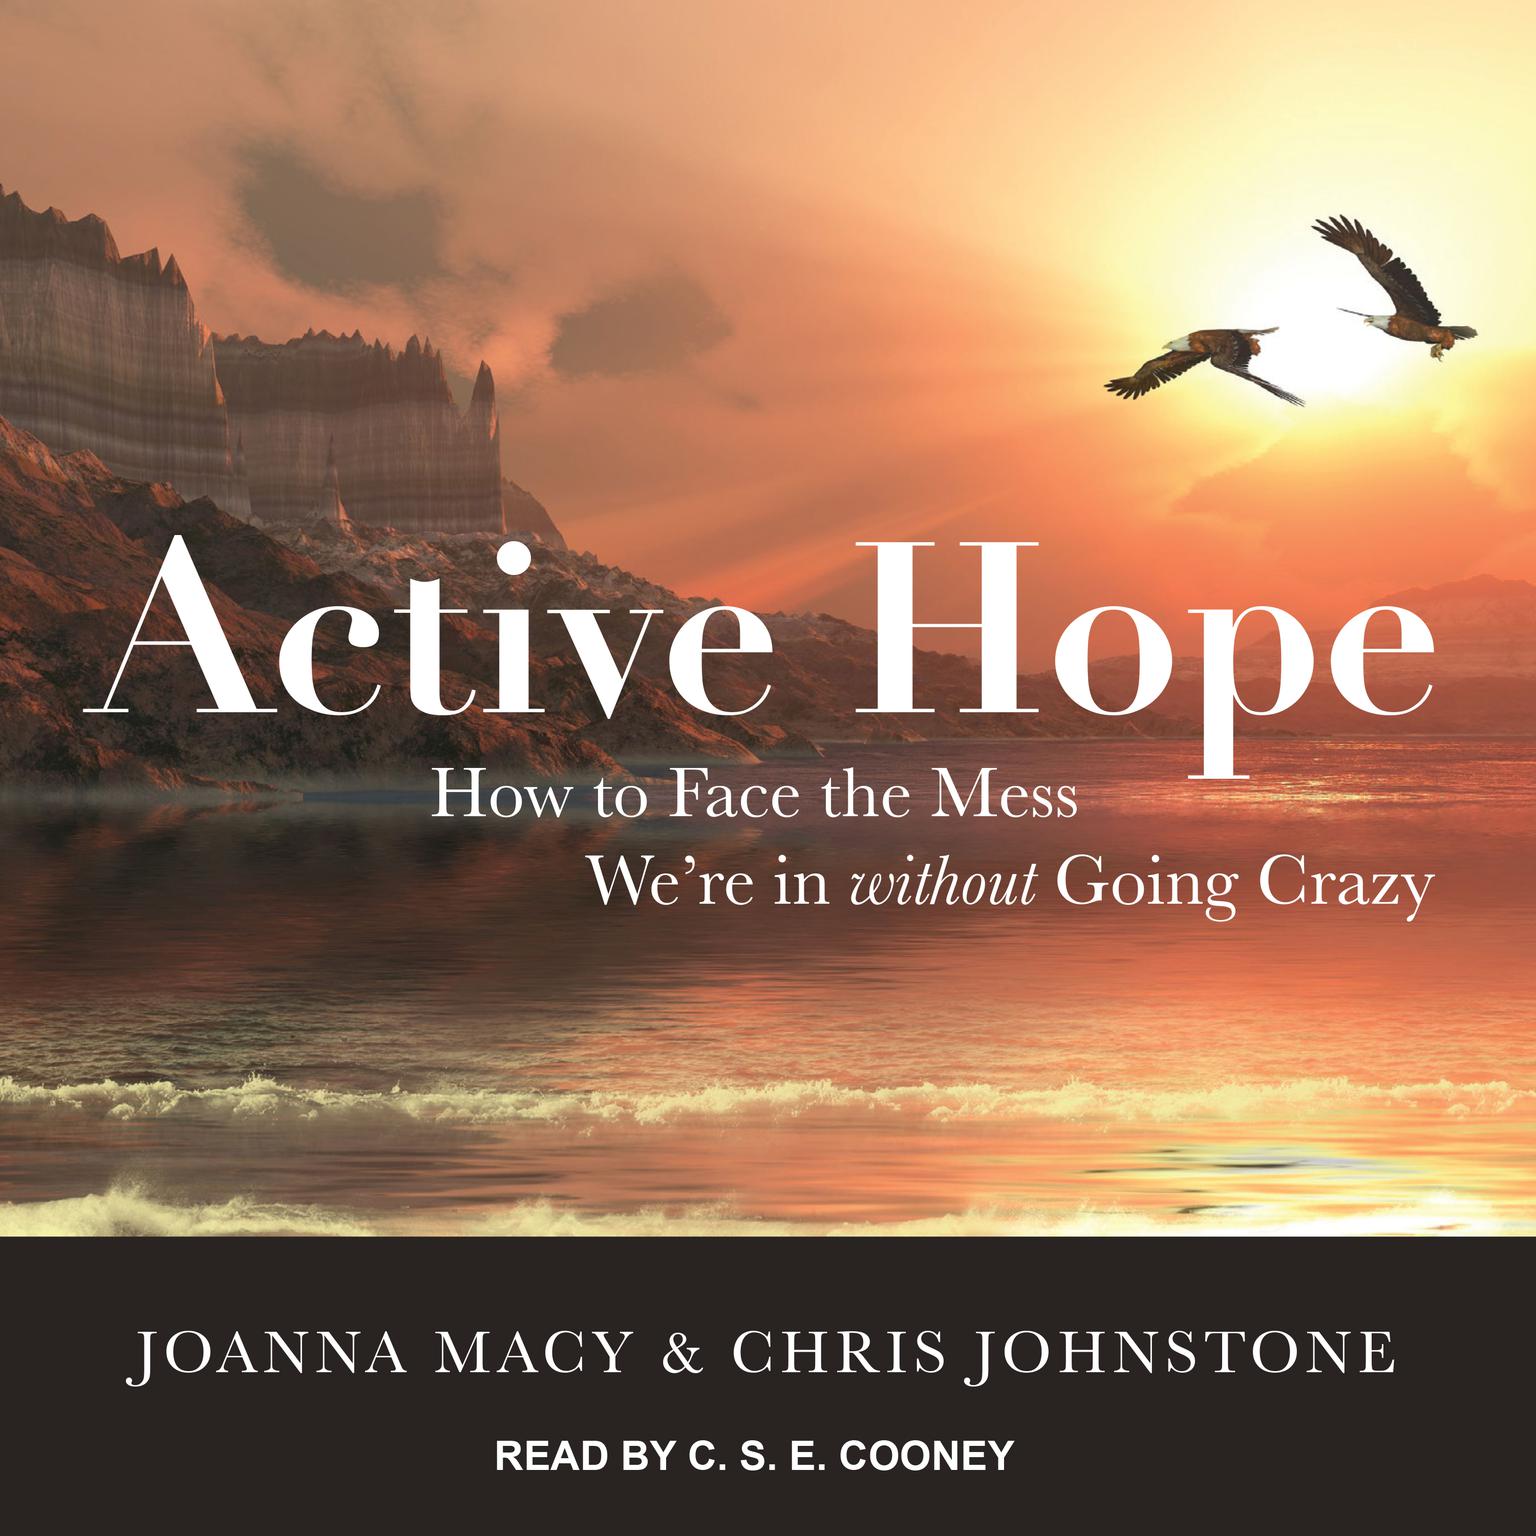 Active Hope: How to Face the Mess Were in without Going Crazy Audiobook, by Joanna Macy